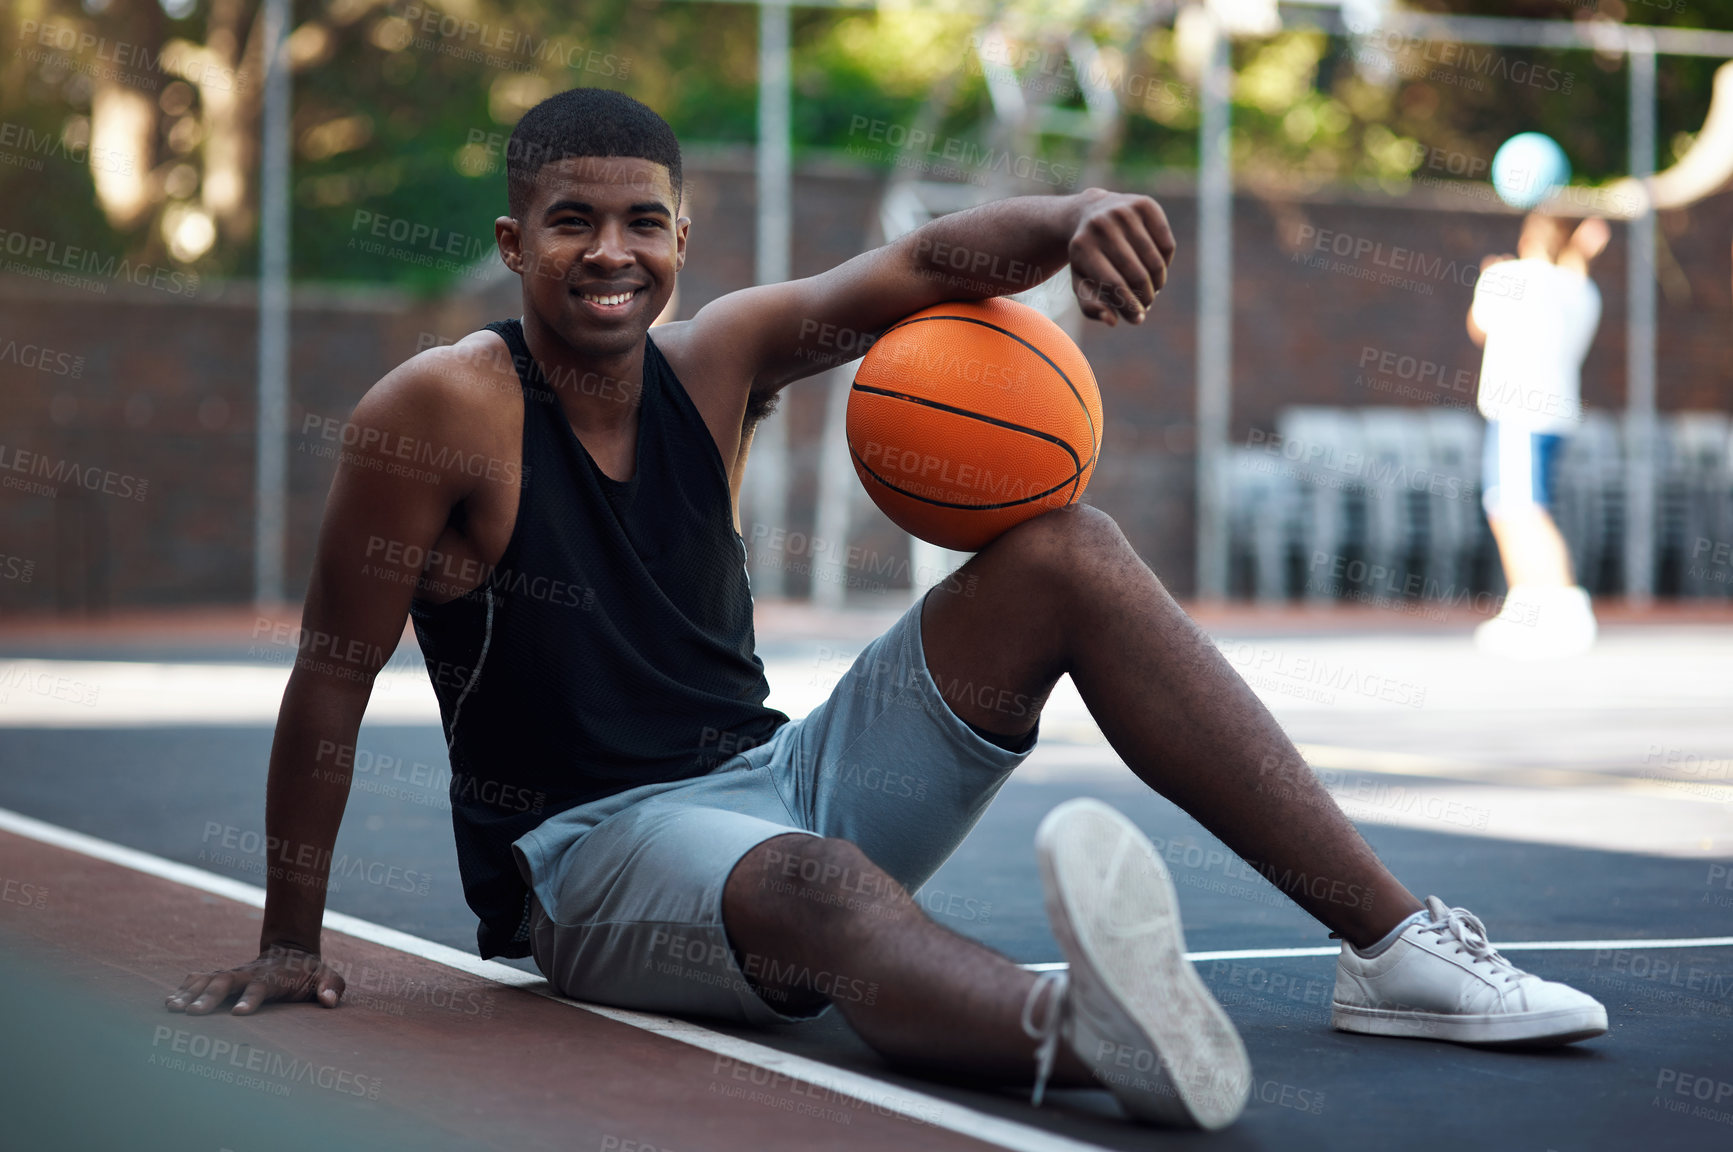 Buy stock photo Portrait of a sporty young man stretching his legs on a basketball court